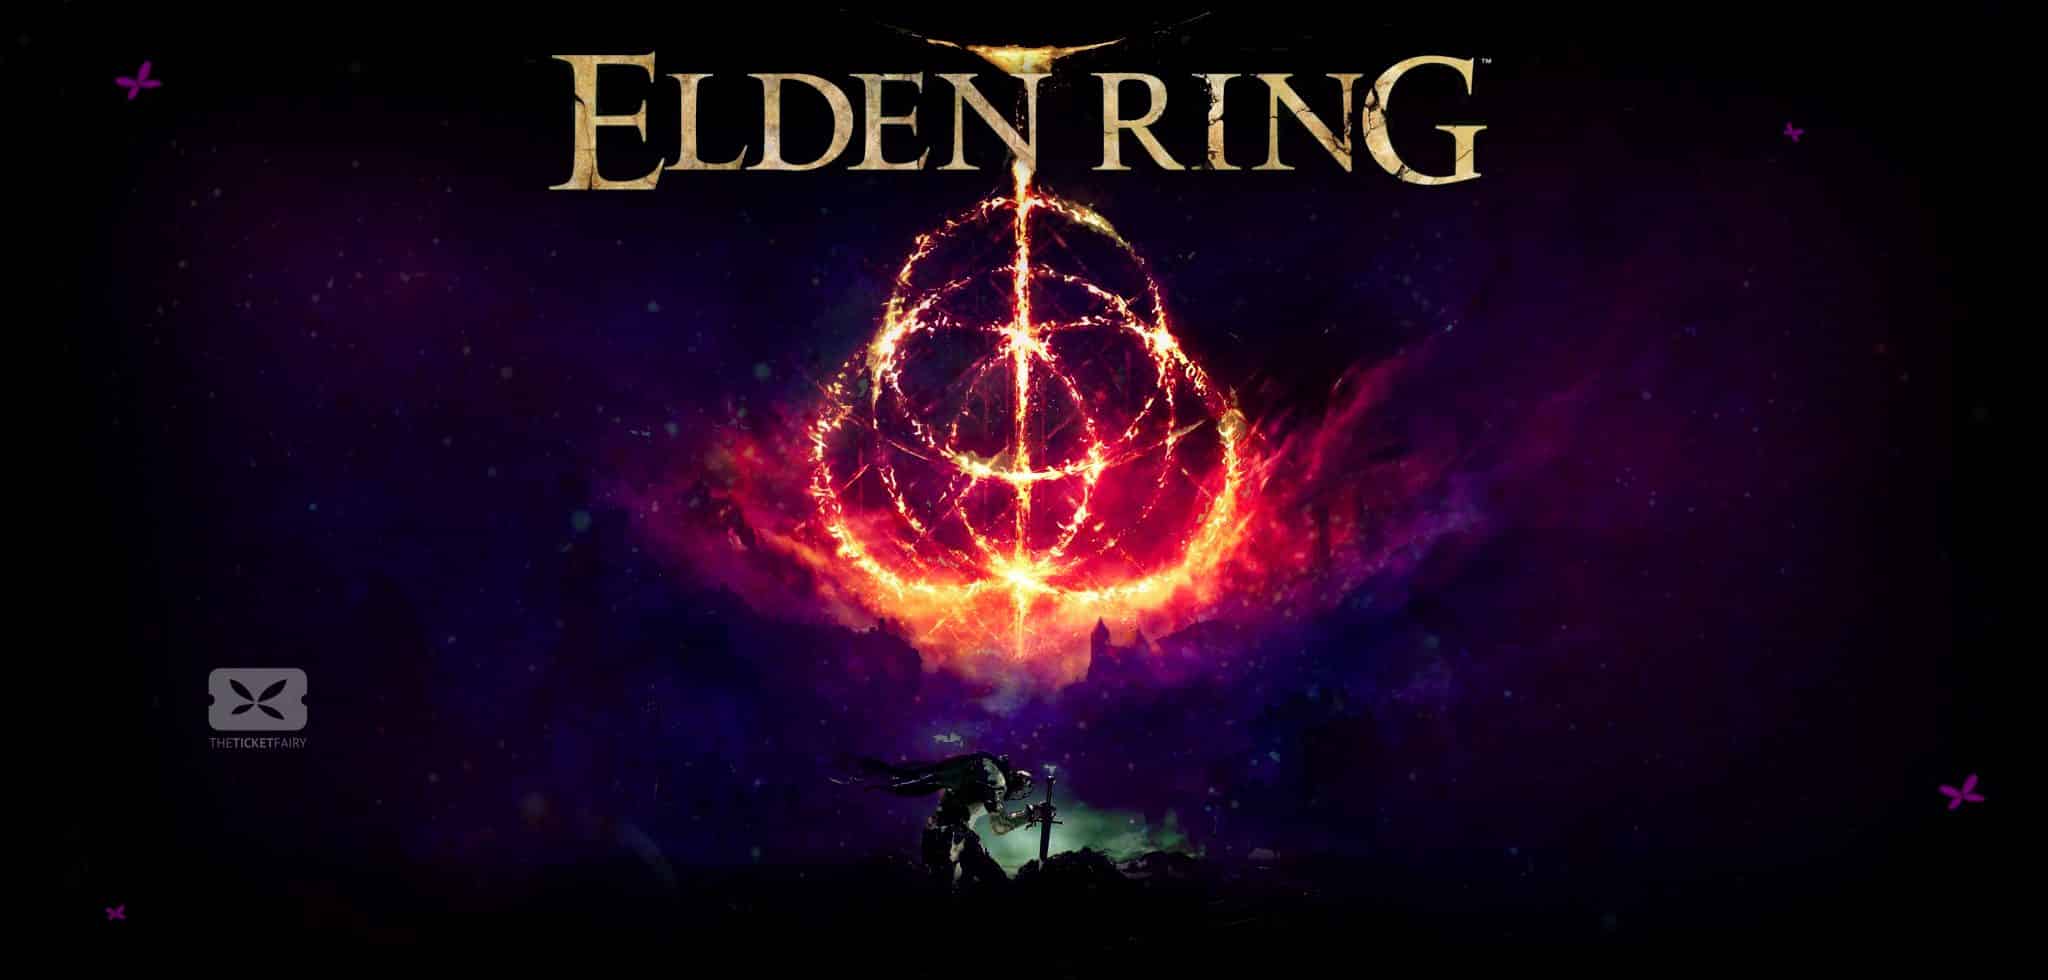 Unraveling the Lore of Elden Ring: Golden Order, Dragons, and the